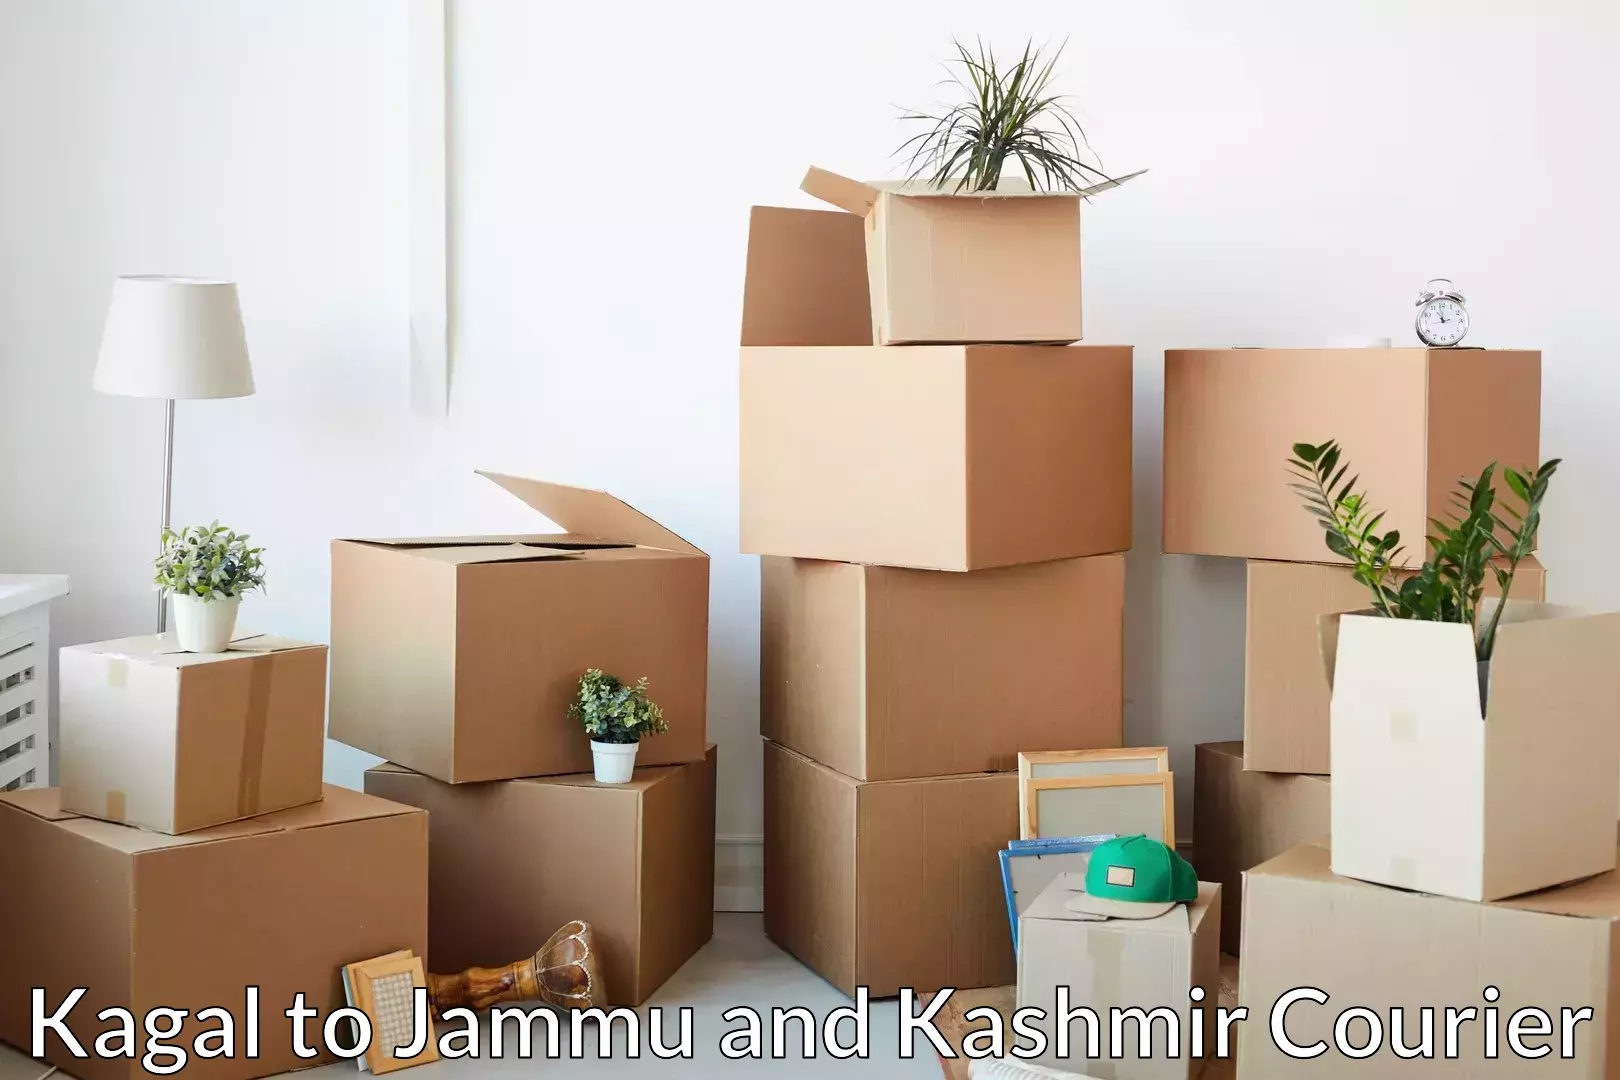 Furniture delivery service Kagal to Jammu and Kashmir